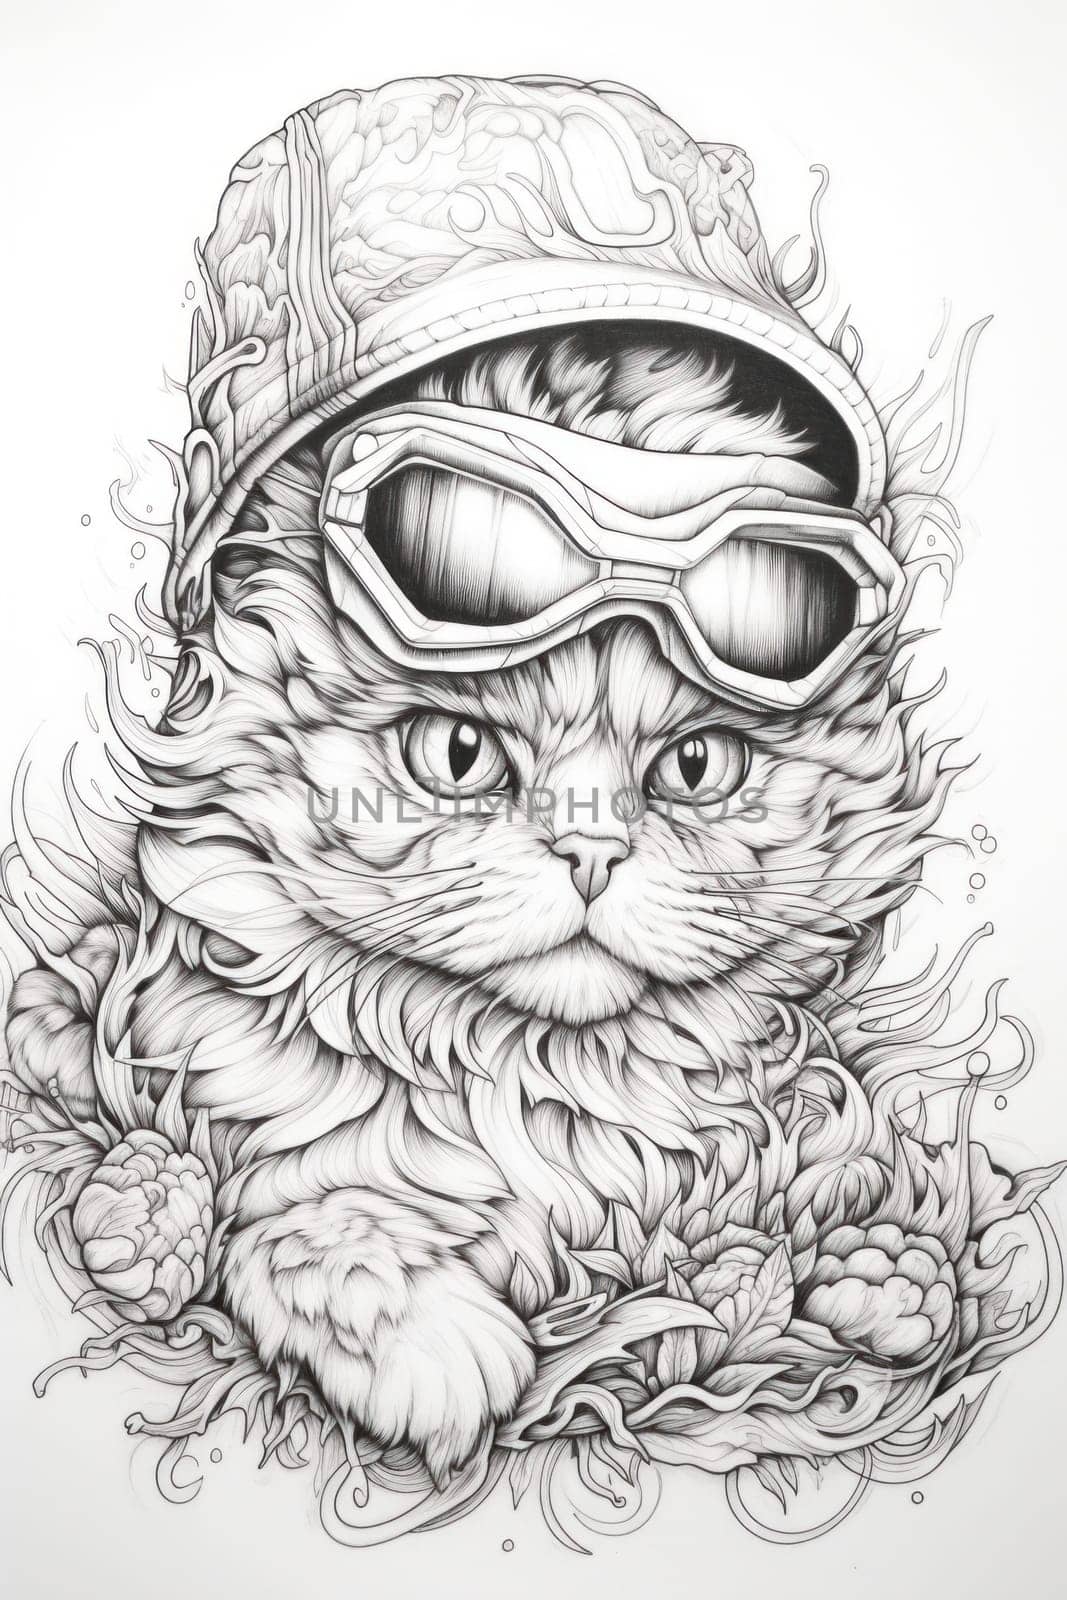 A drawing of a cat wearing a motorcycle helmet, AI by starush